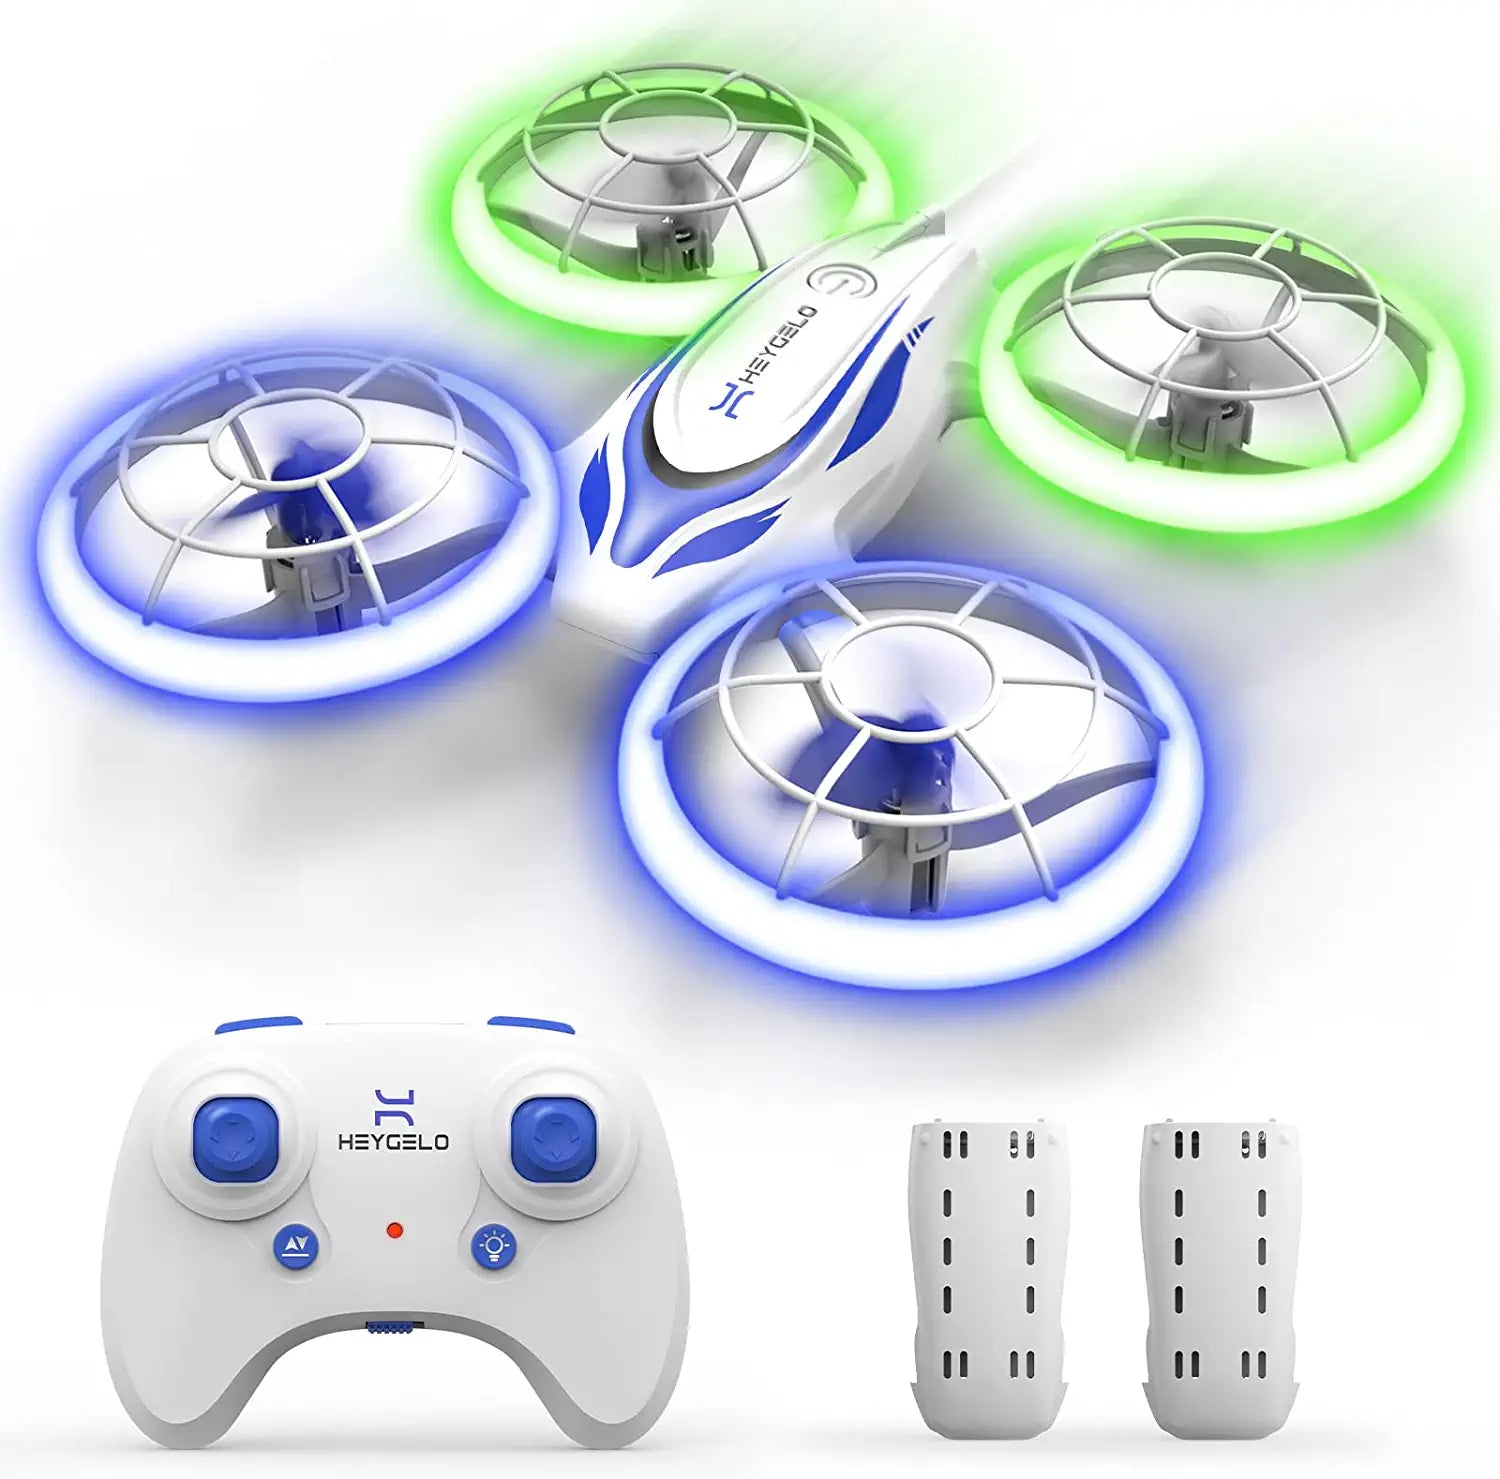 AVIALOGIC Mini Drone with Camera for Kids - 1080P HD FPV Drones, Remote  Control Cool Toys Gifts for Boys Girls with LED Display Controller,  Foldable